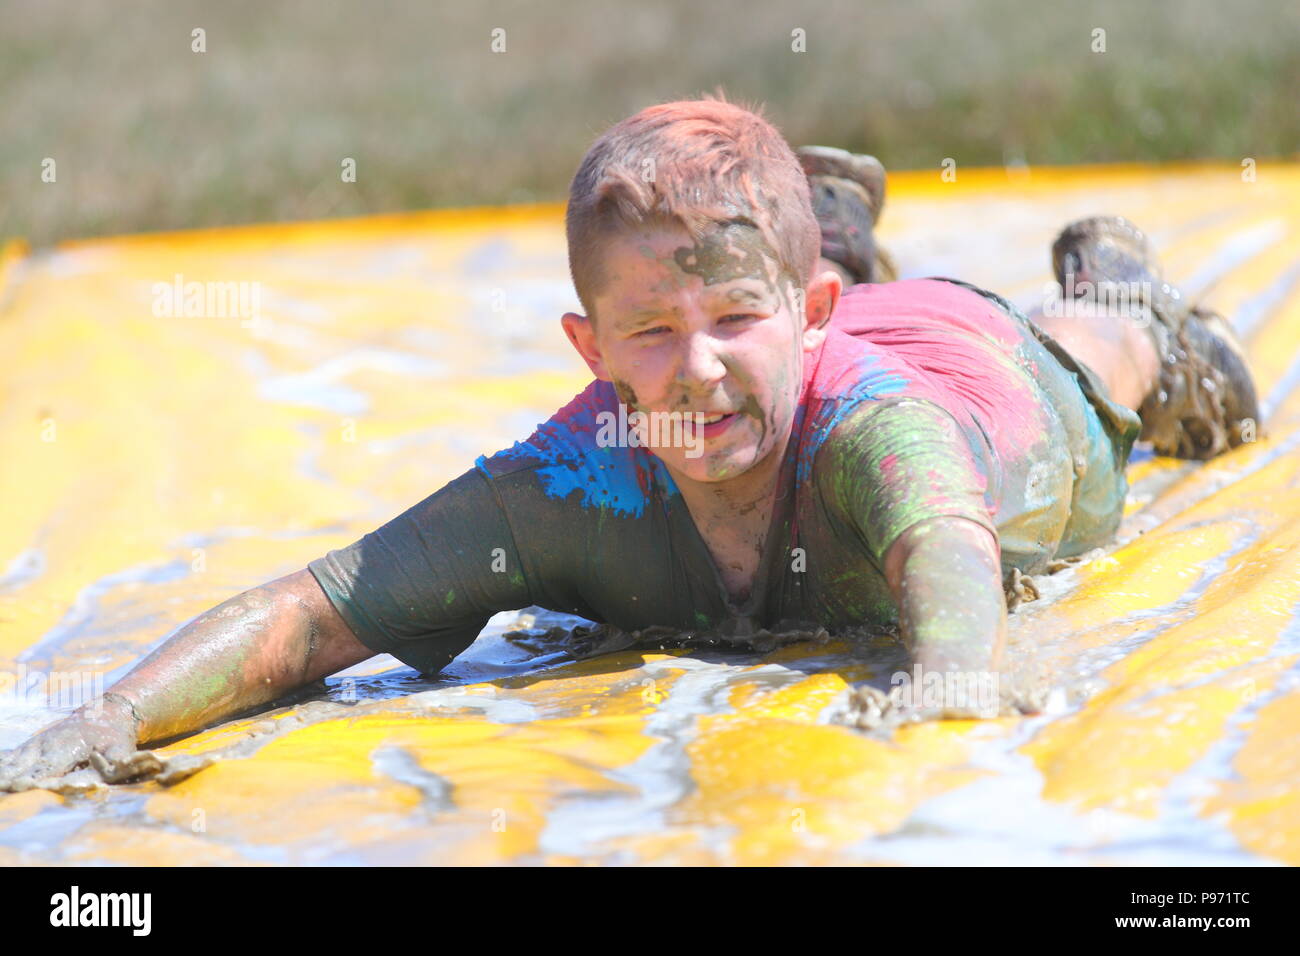 A young boy having fun on a mud slide and one of many obstacles during a Young Mudders event which is a 2.5k & 5k muddy obstacle course. Stock Photo